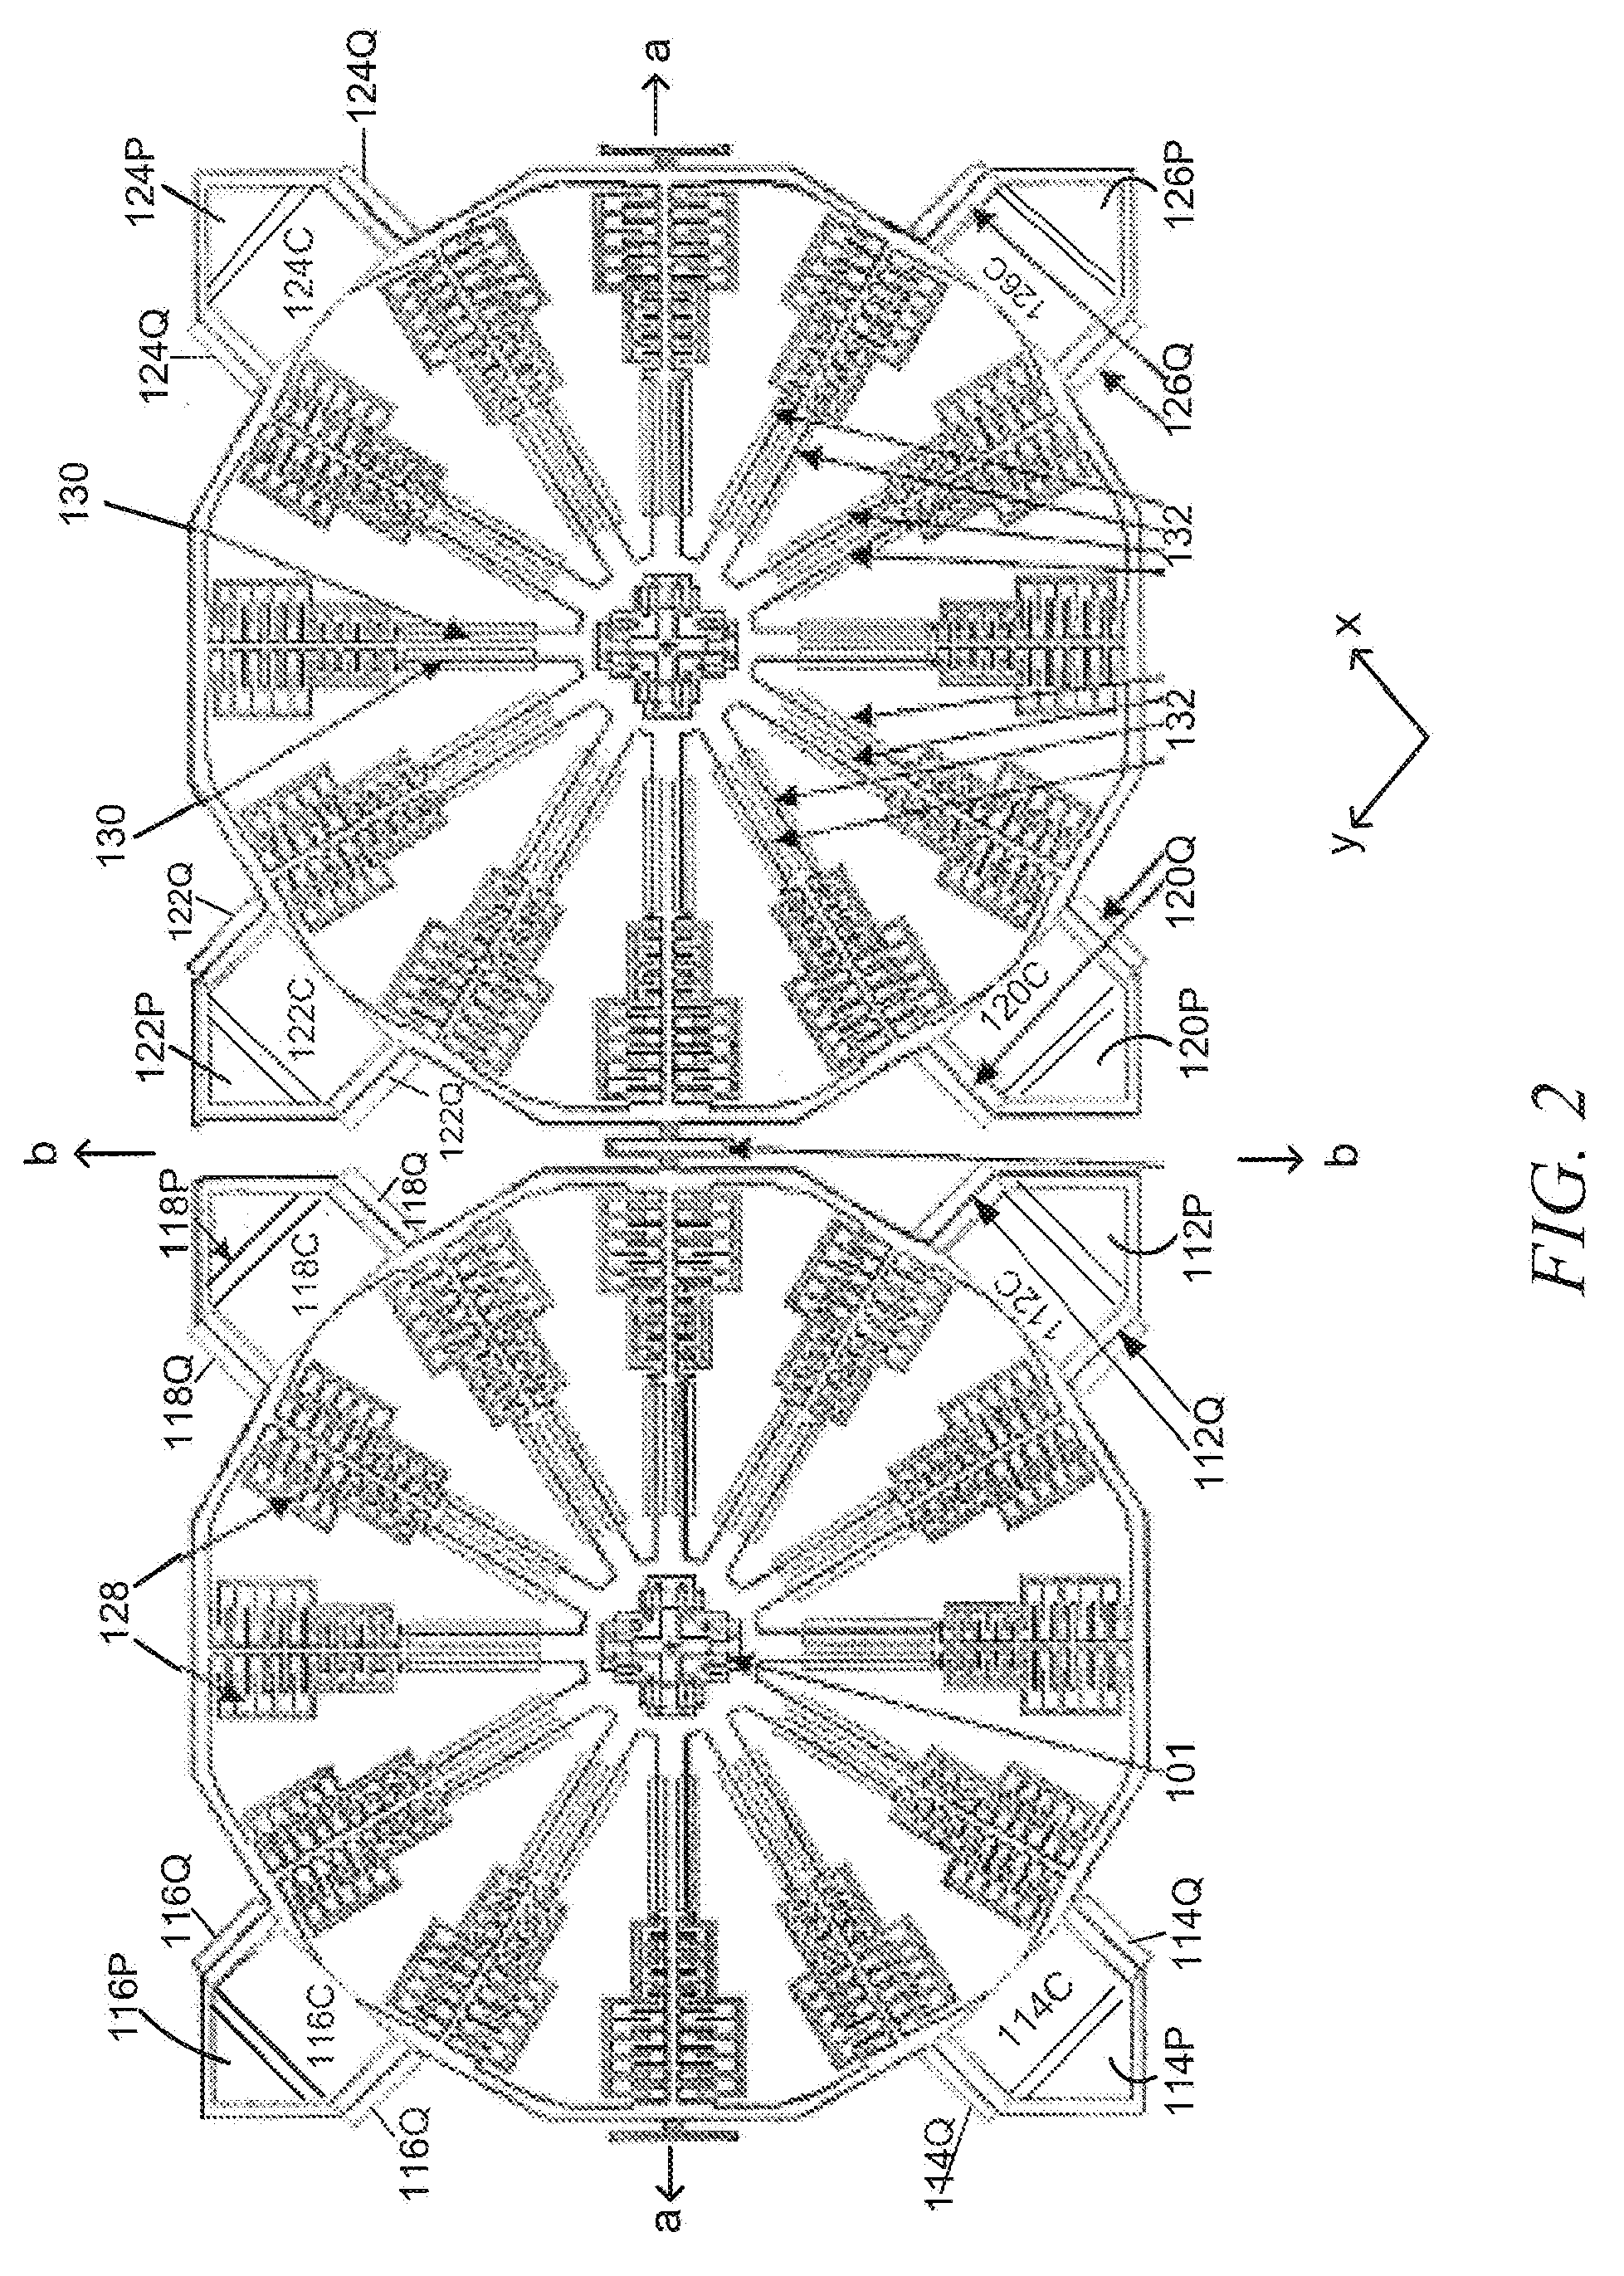 Mode-Matching Apparatus and Method for Micromachined Inertial Sensors